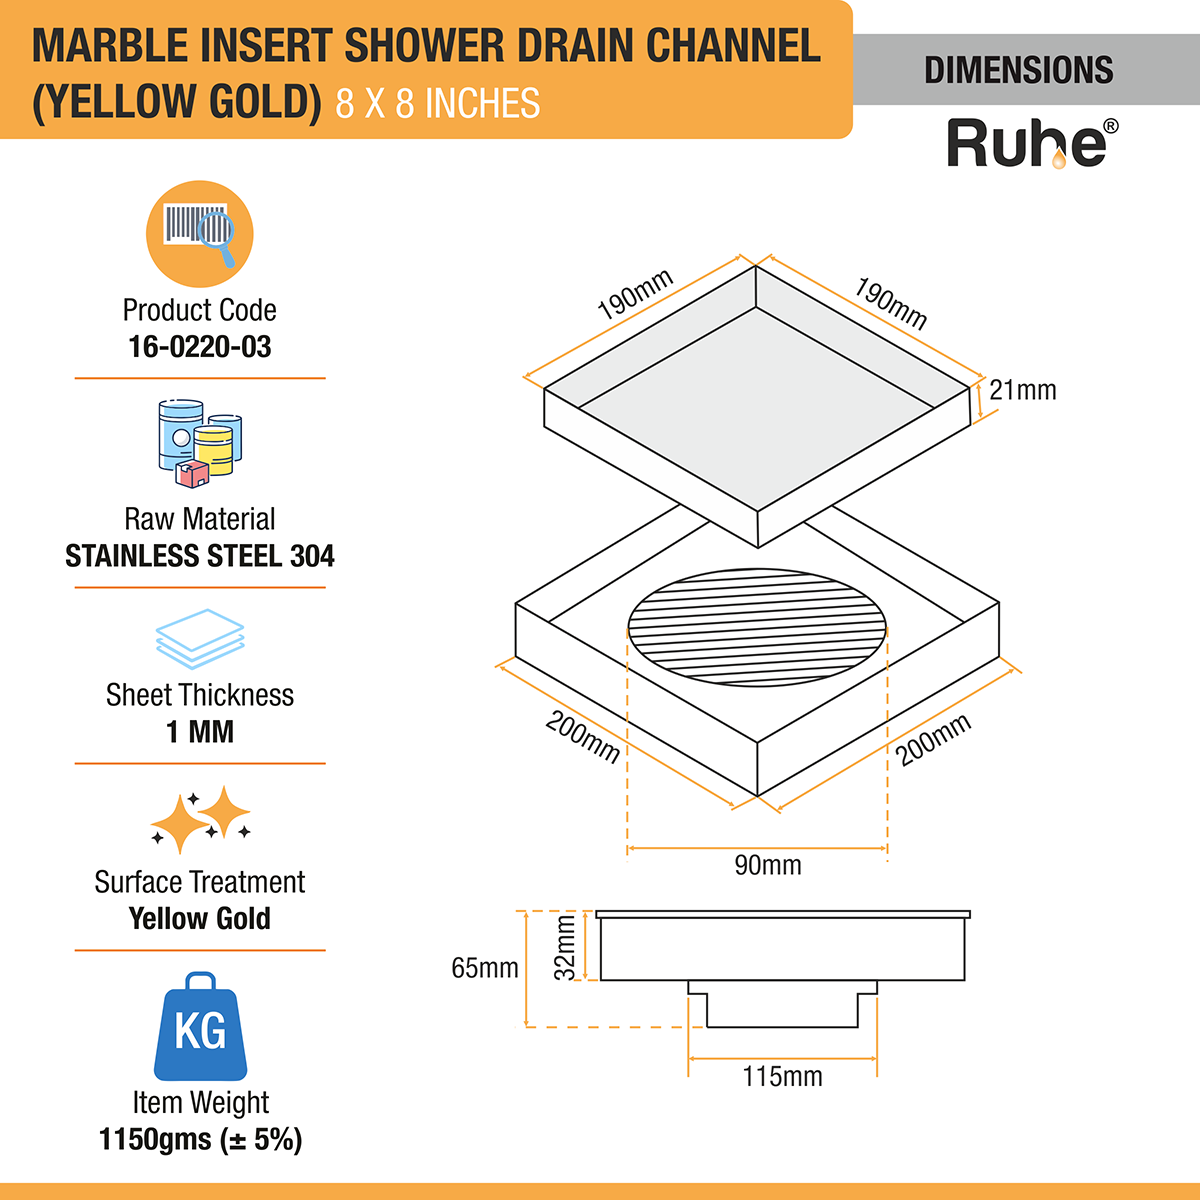 Marble Insert Shower Drain Channel (8 x 8 Inches) YELLOW GOLD PVD Coated dimensions and sizes